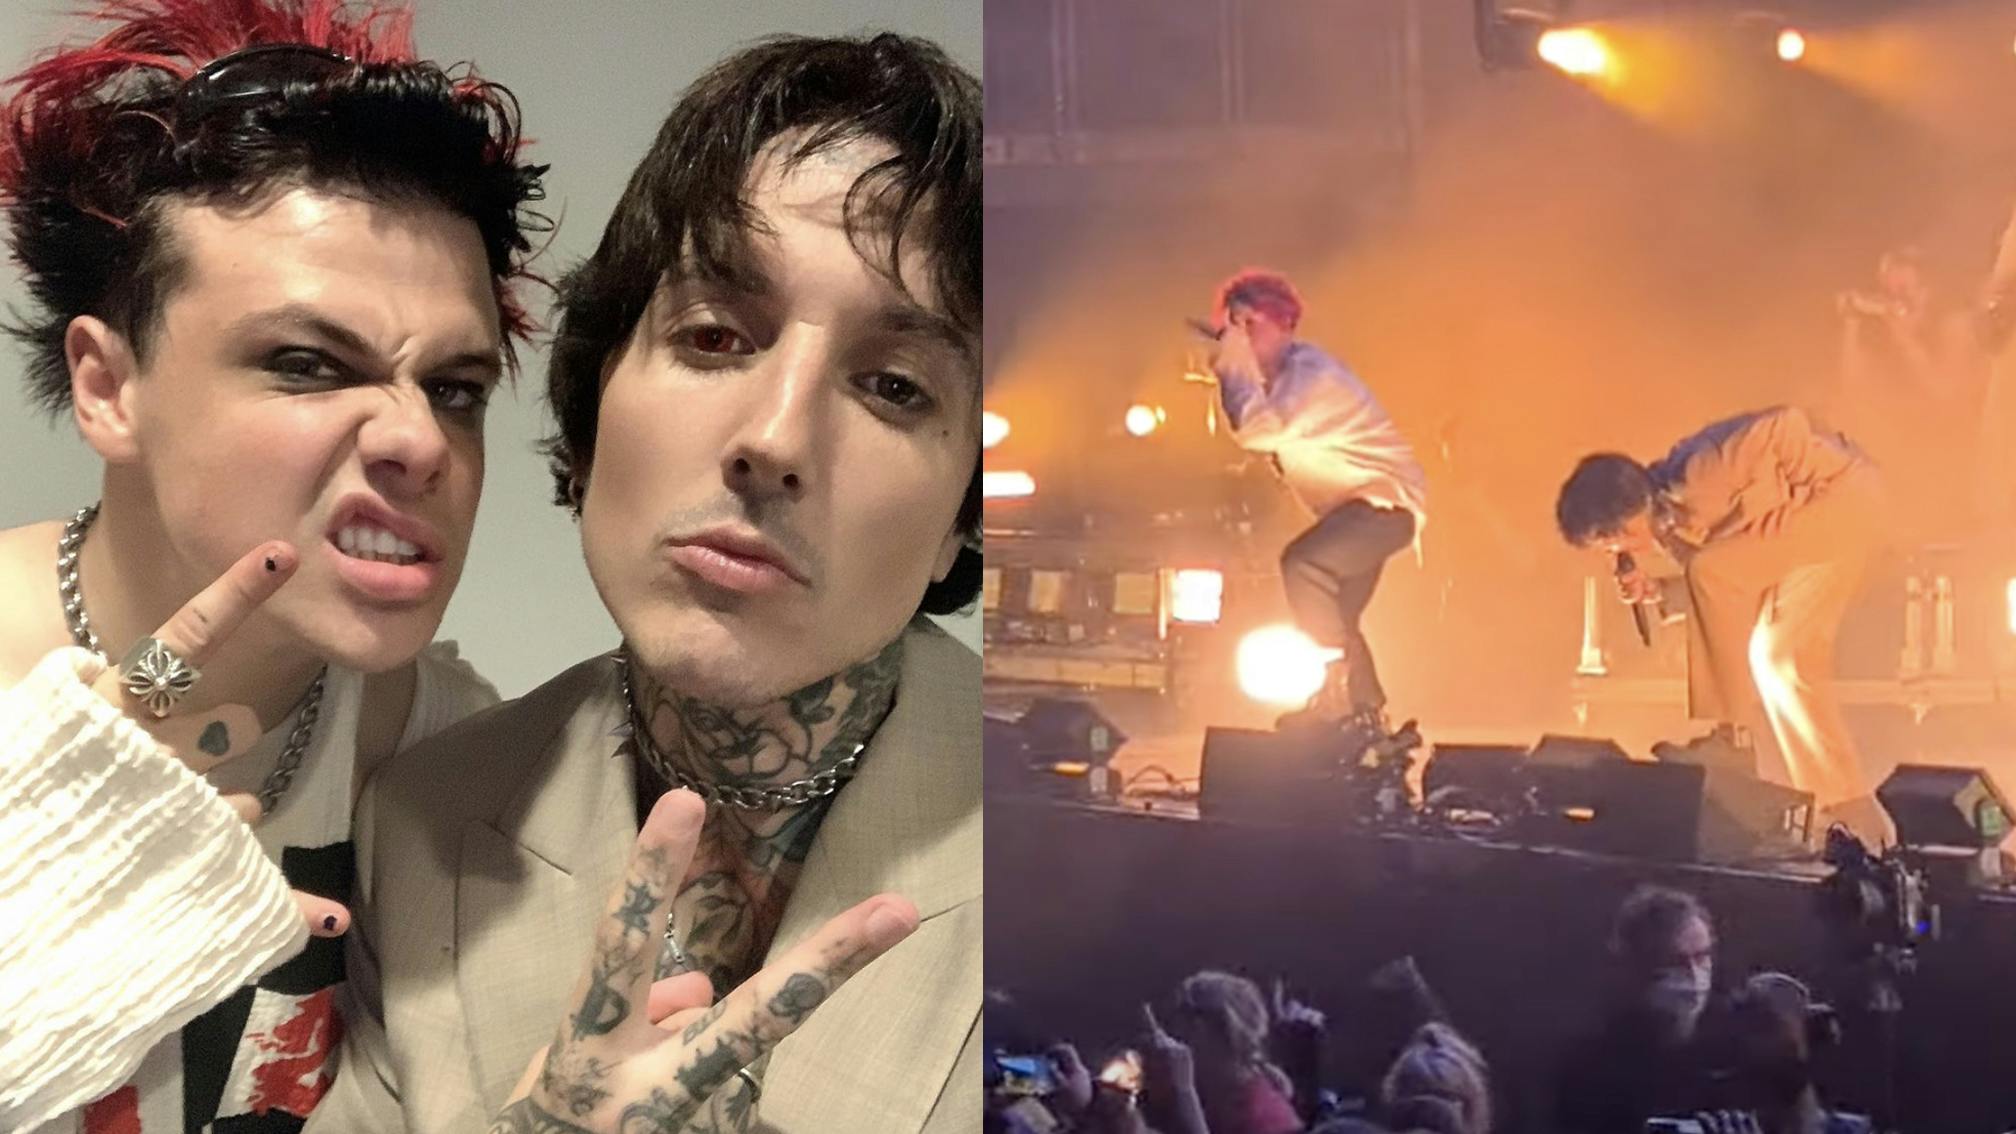 Huge mosh-pits erupt as YUNGBLUD joins Bring Me The Horizon onstage for Obey